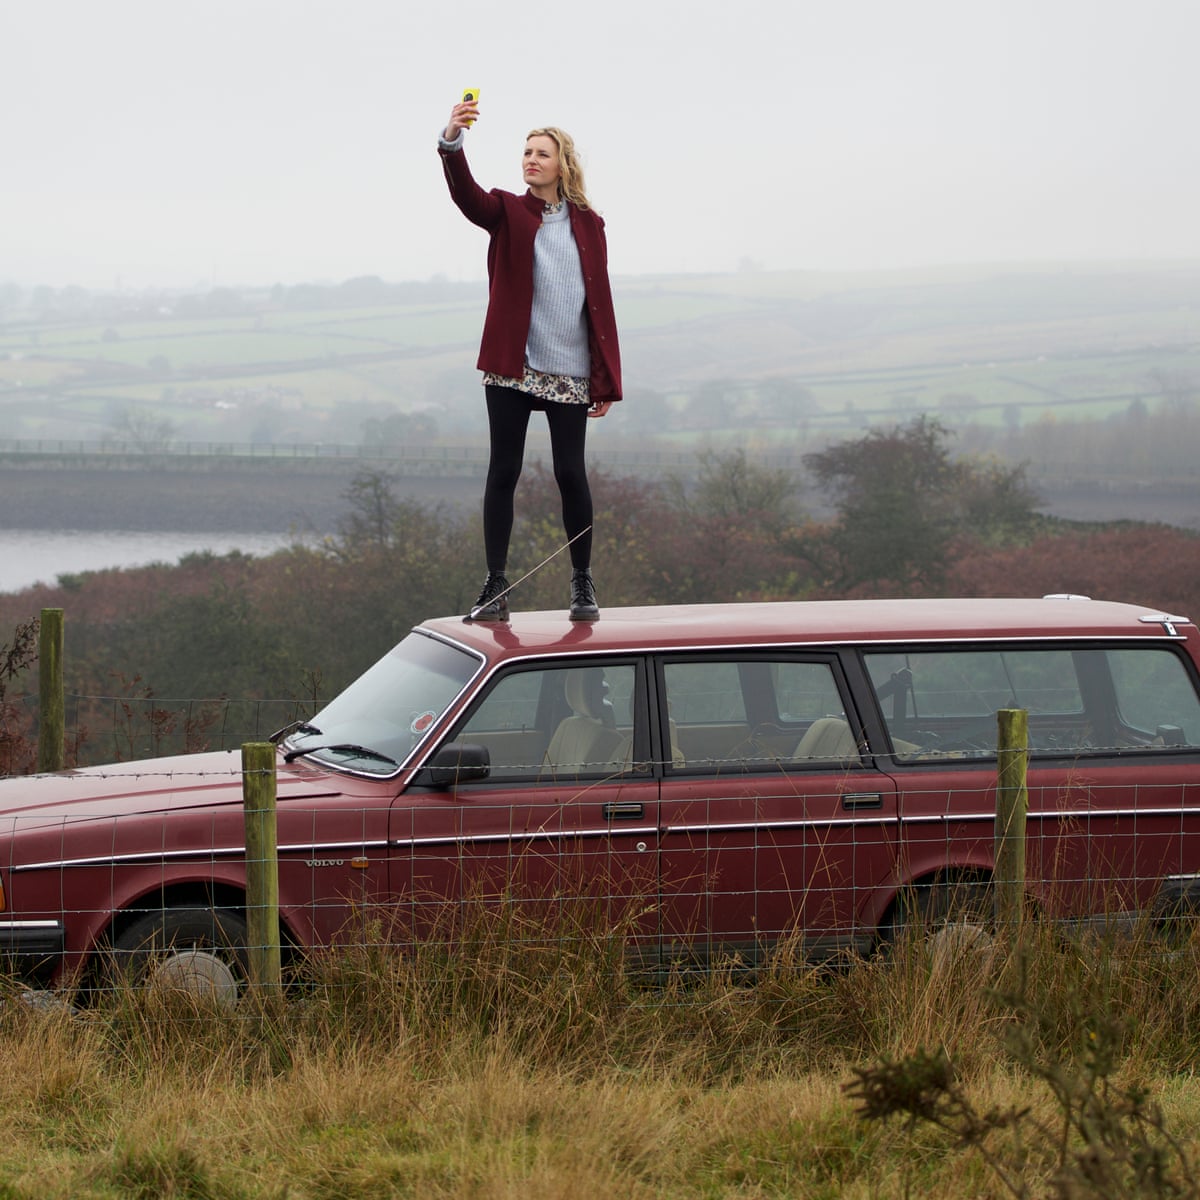 Burn Burn Burn Review Confident Road Trip Comedy About Millennials Comedy Films The Guardian